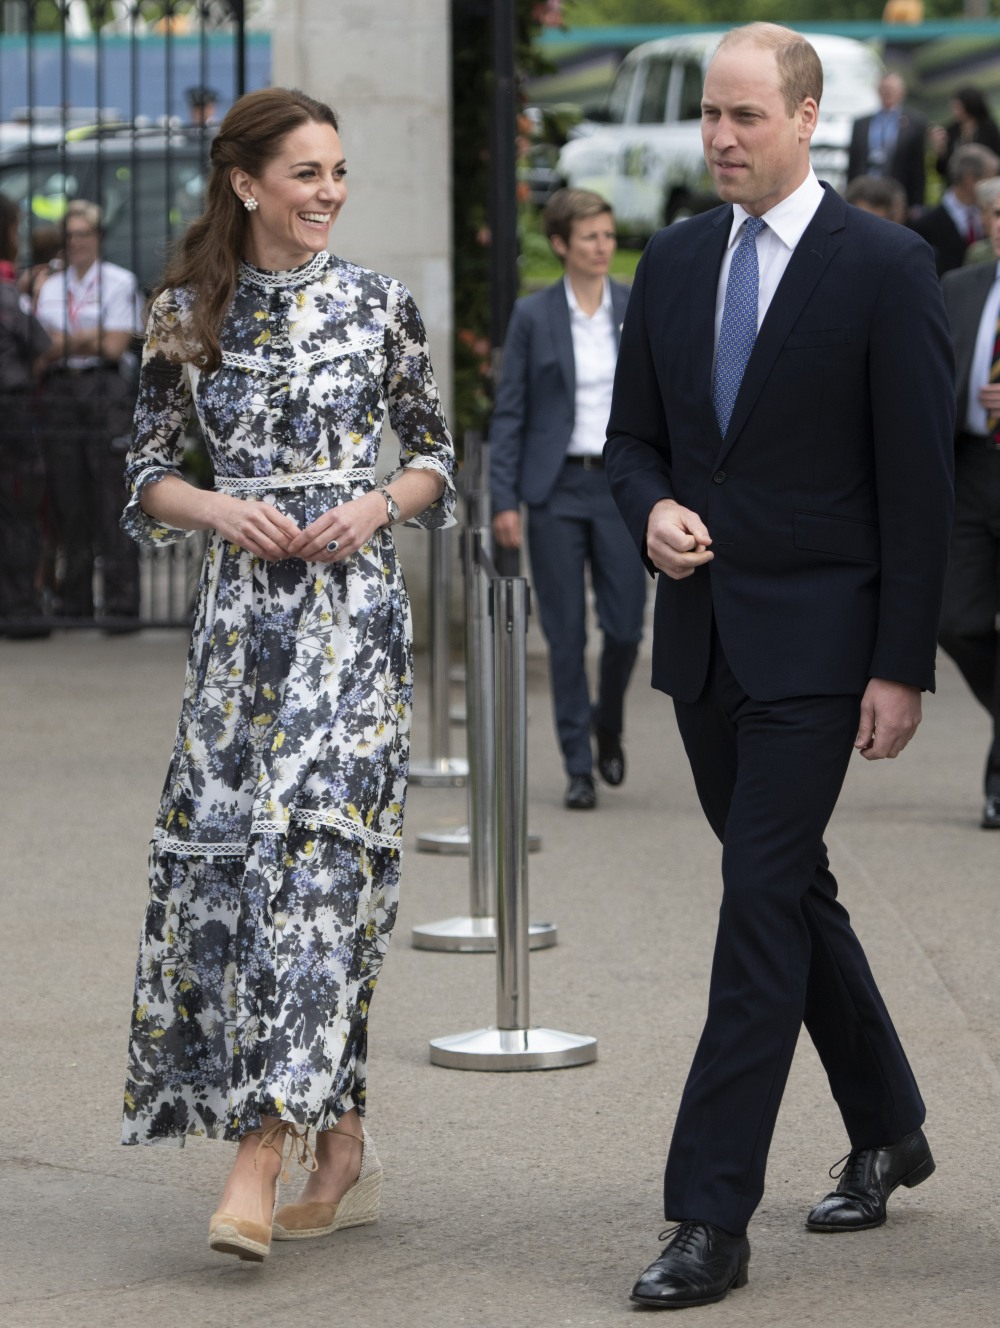 The Duke and Duchess of Cambridge at Chelsea Flower Show